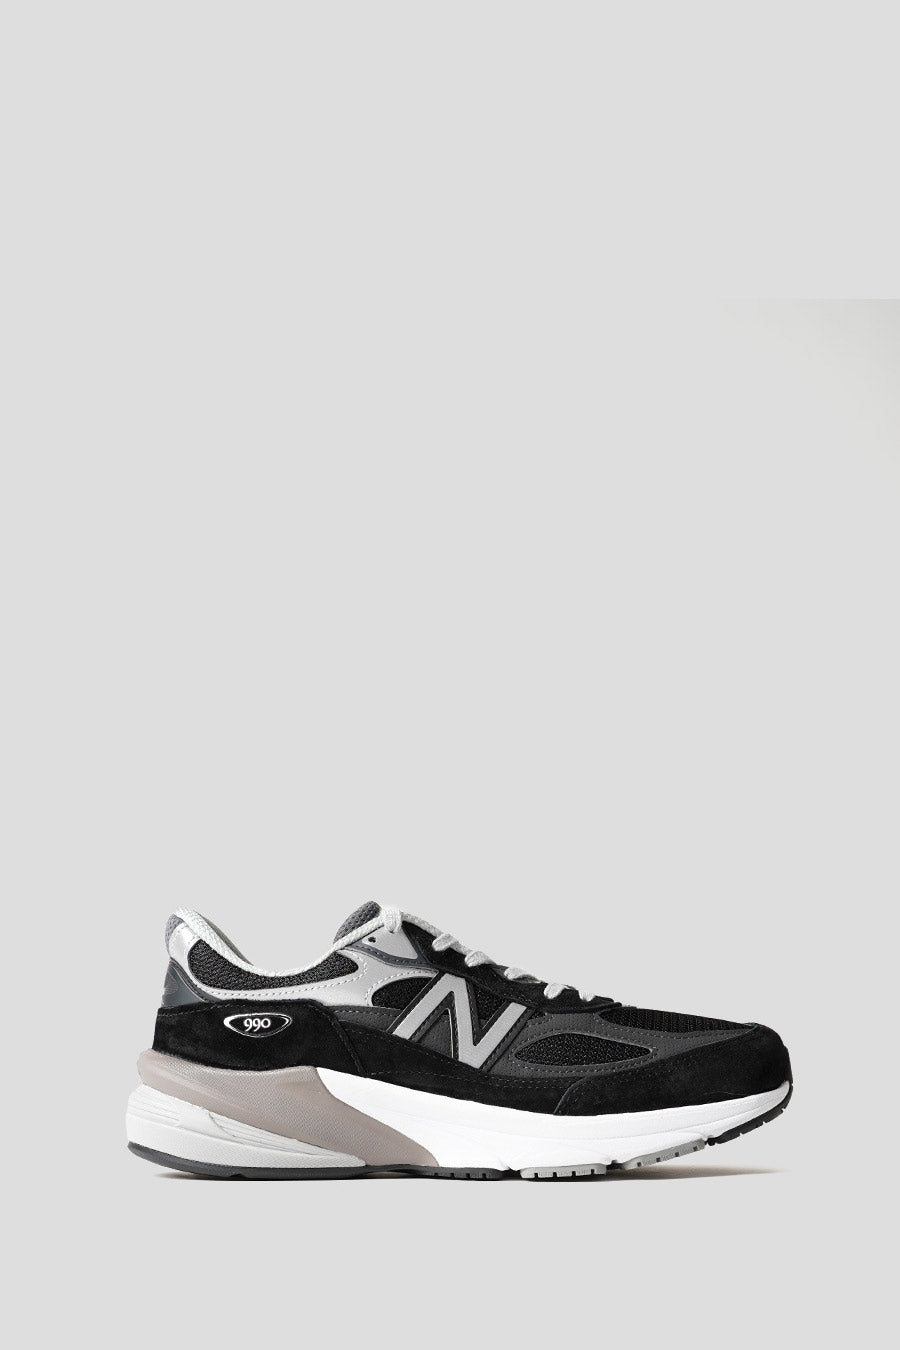 NEW BALANCE - SNEAKERS MADE IN USA W990V6 NOIRES - LE LABO STORE